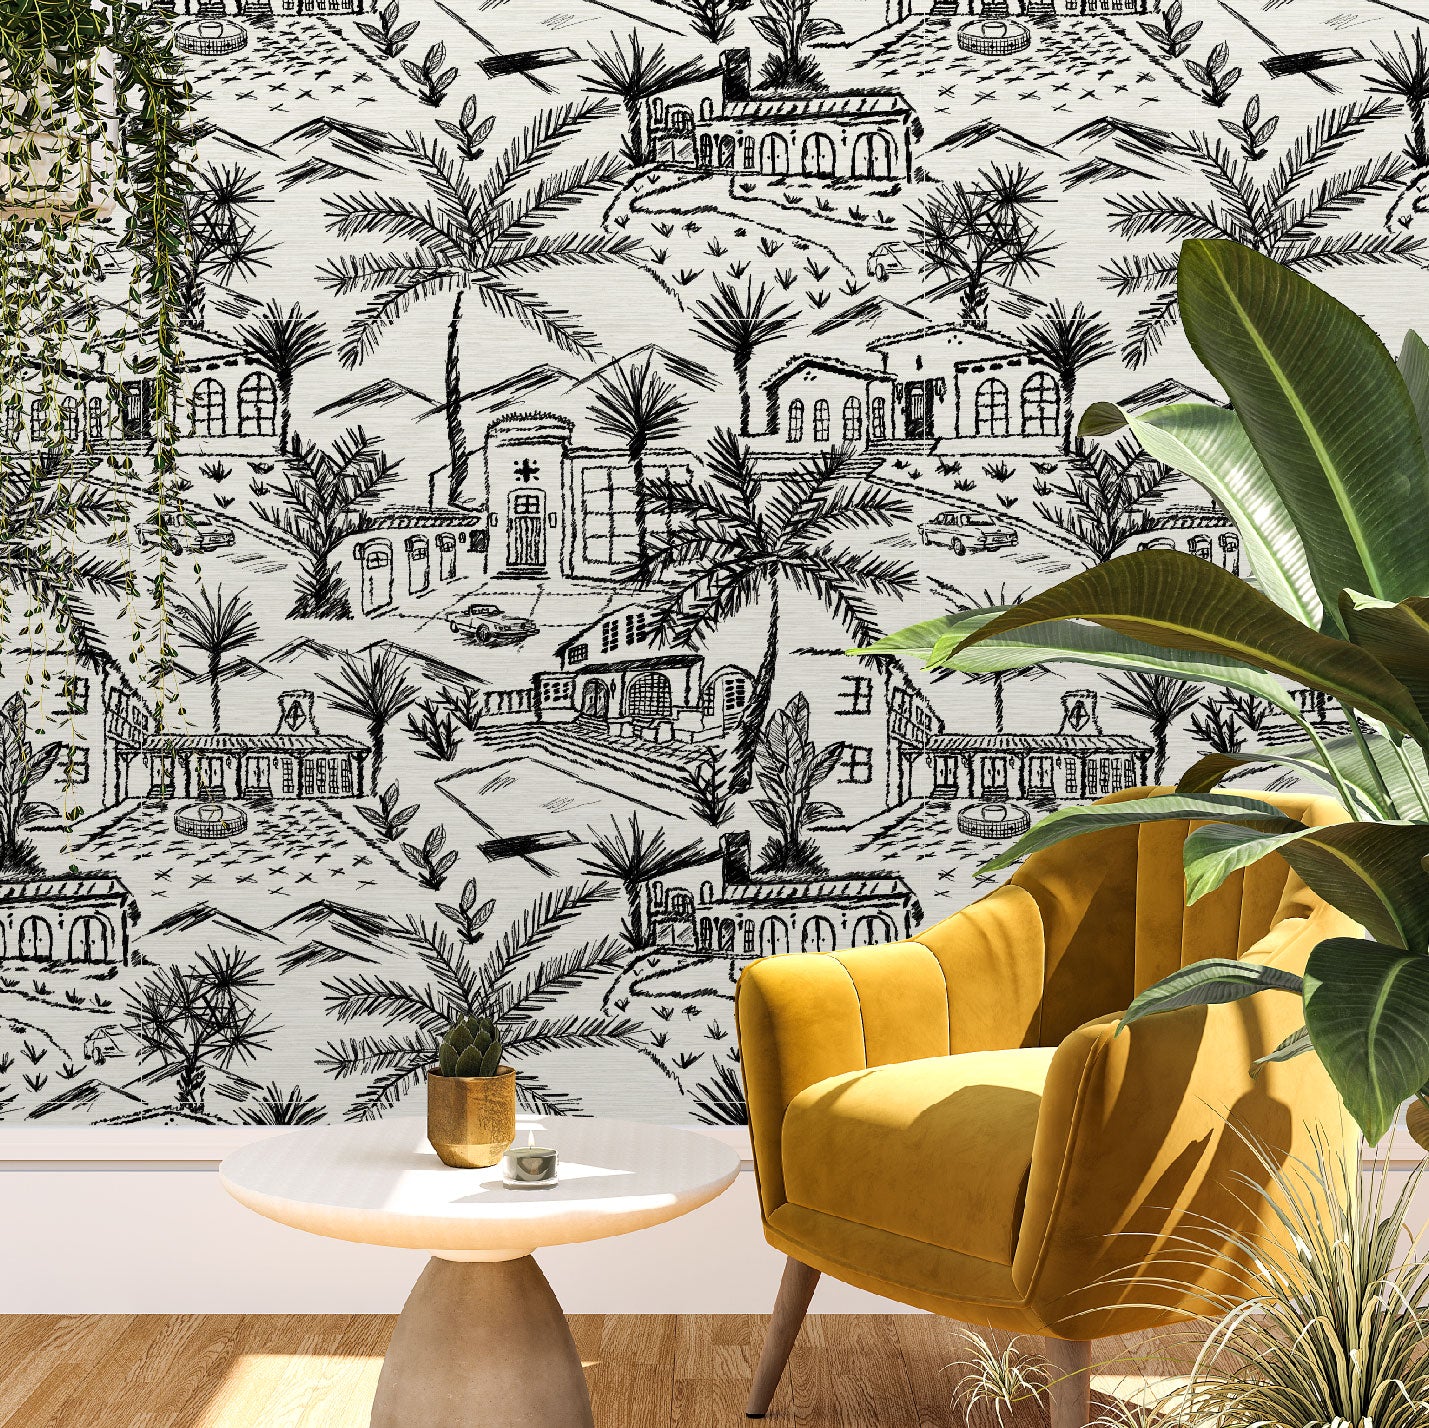 Living room with grasscloth printed modern toile design featuring white base and black graphic for a one color print with Spanish style houses, variety of palm trees and tropical and desert inspired plants, massive pools, vintage cars and fountains with mountains in the background.